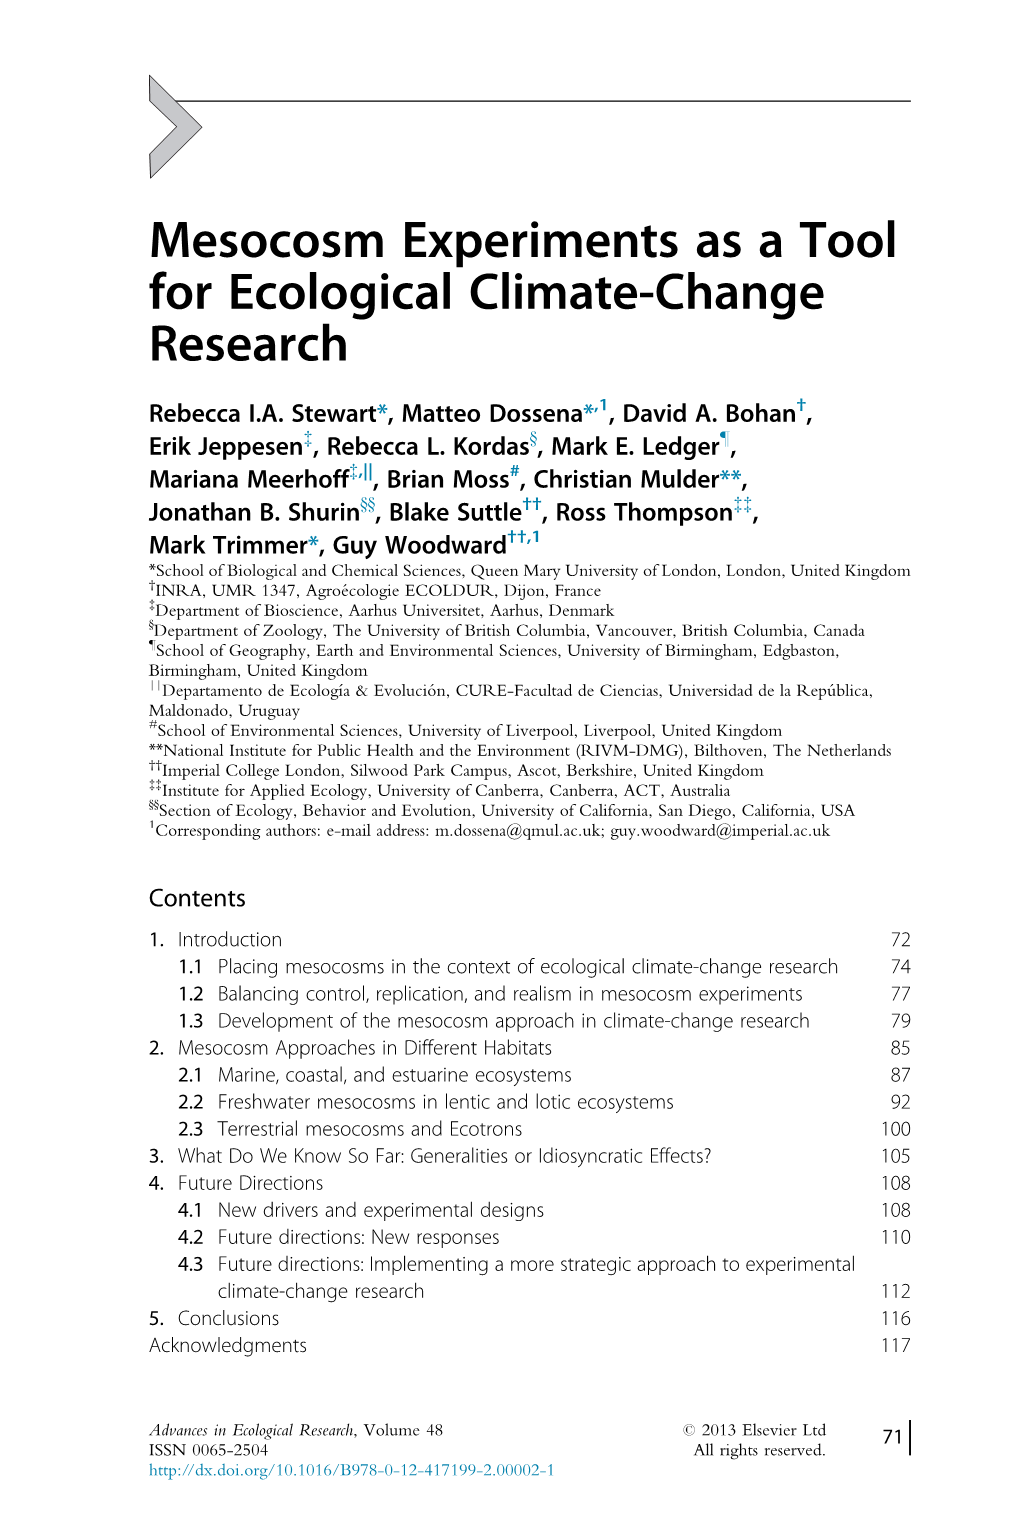 Mesocosm Experiments As a Tool for Ecological Climate-Change Research